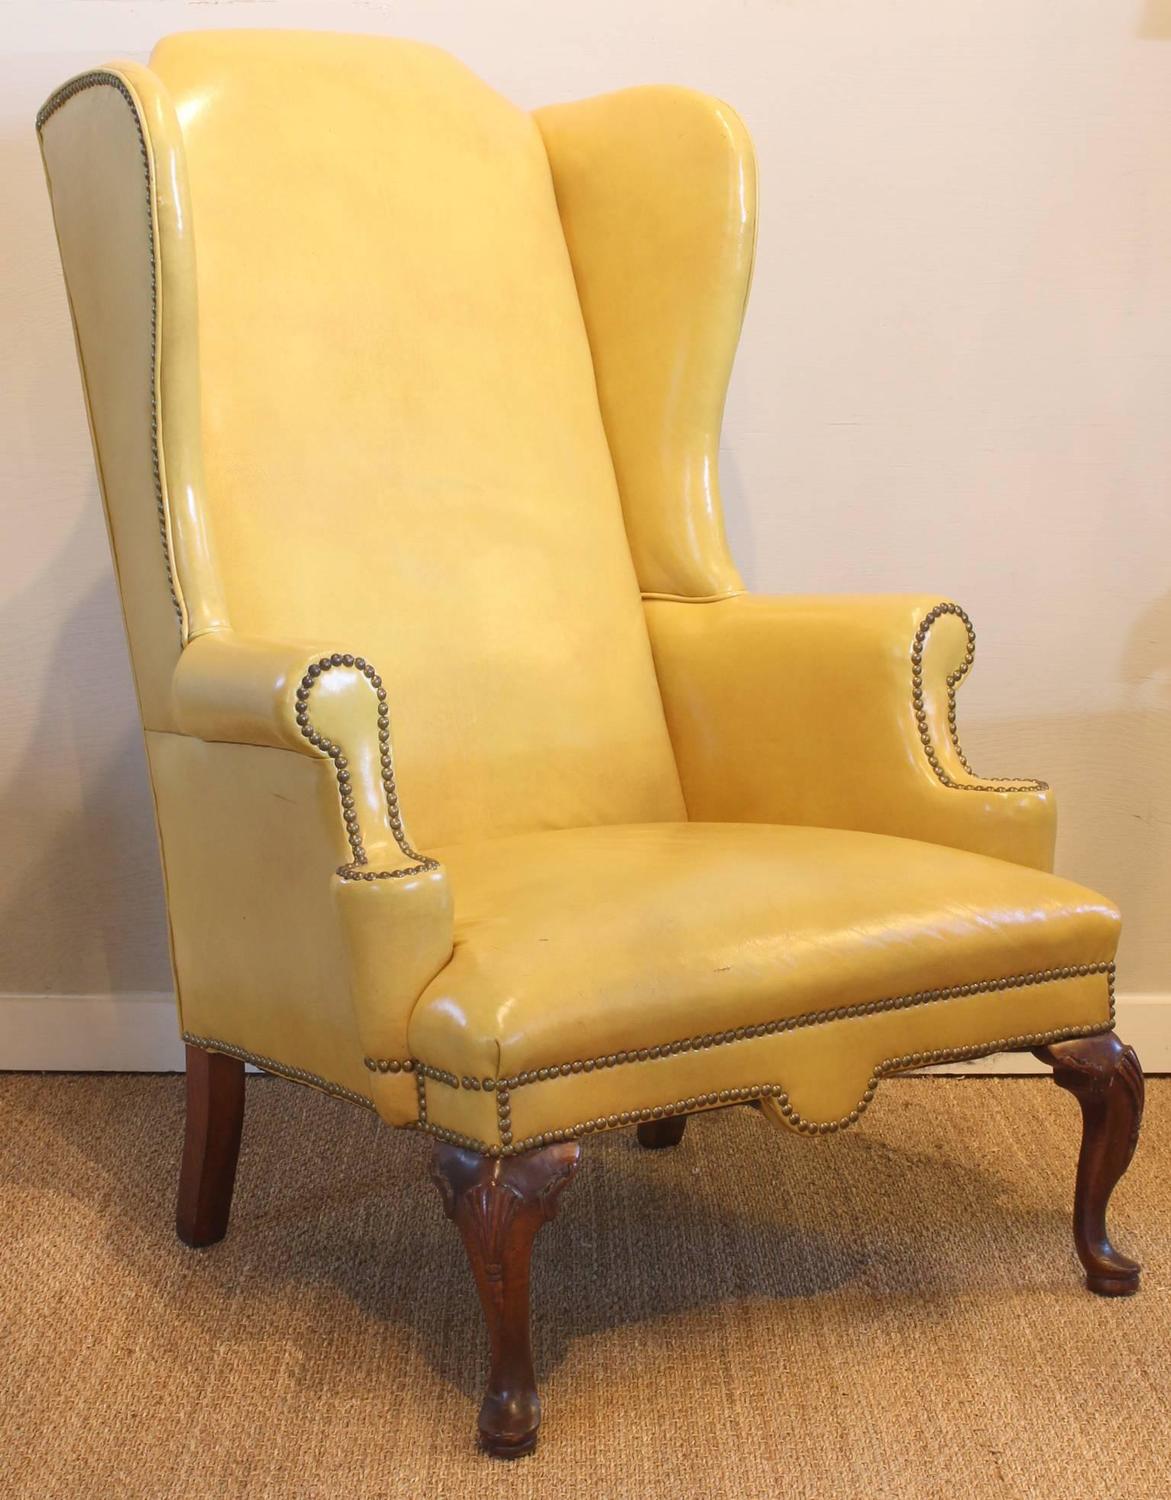 Mustard Yellow Leather Wing Chair at 1stdibs